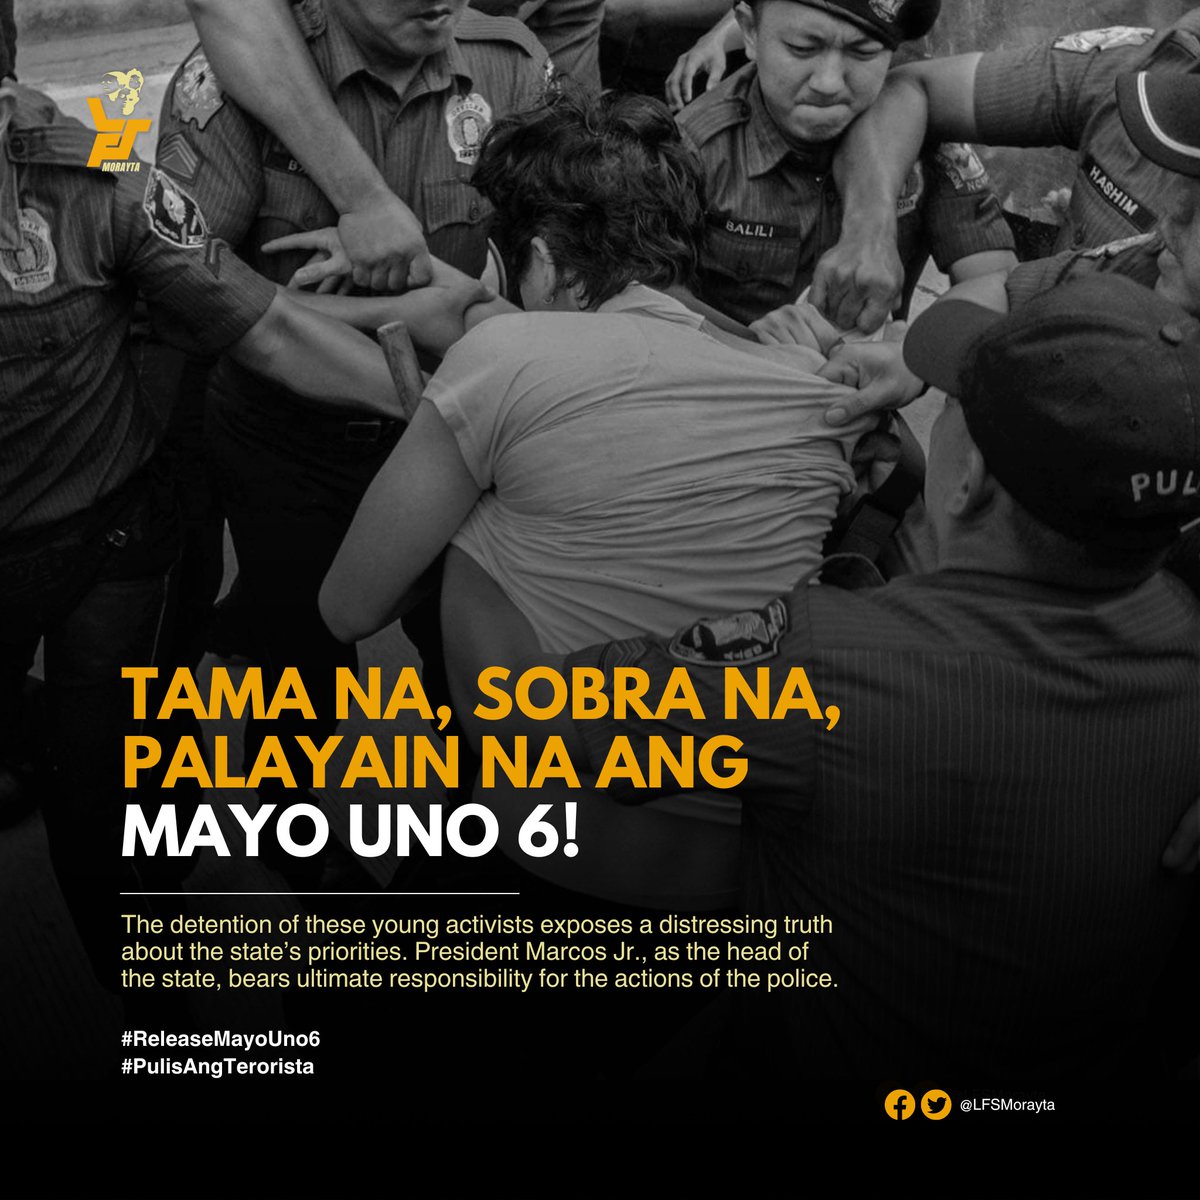 TAMA NA, SOBRA NA, PALAYAIN NA ANG MAYO UNO 6!

The League of Filipino Students - Morayta urgently demands the release of the Mayo Uno 6, who have been wrongfully detained since last week’s Labor Day protest at the US Embassy. (1)

#ReleaseMayoUno6
#PulisAngTerorista